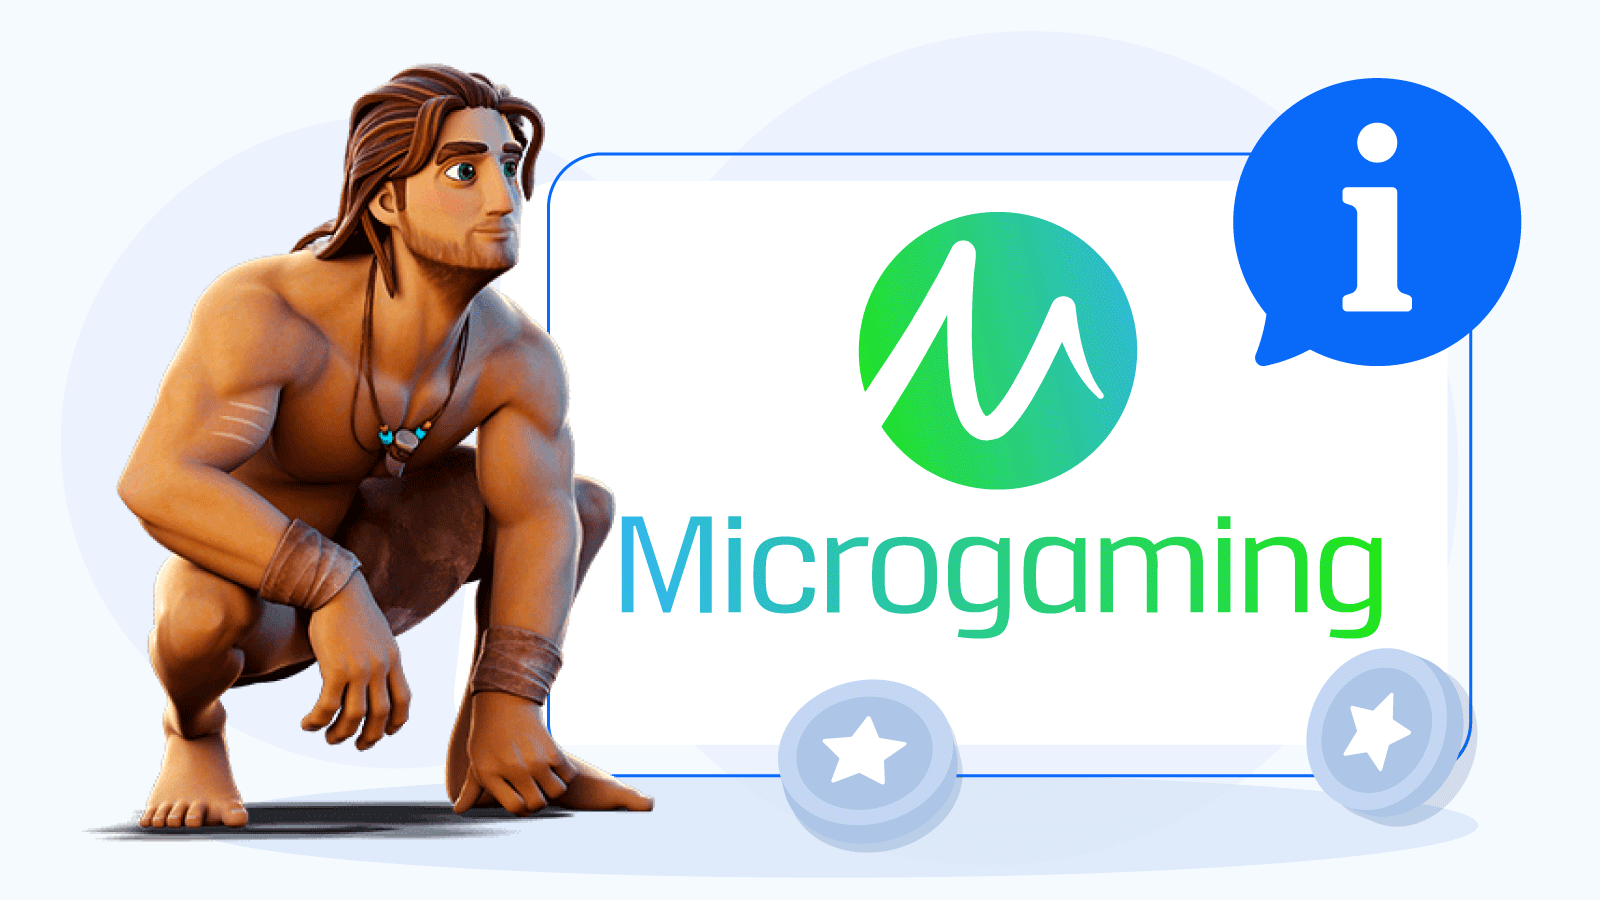 What You Need to Know About Microgaming (Short Presentation)